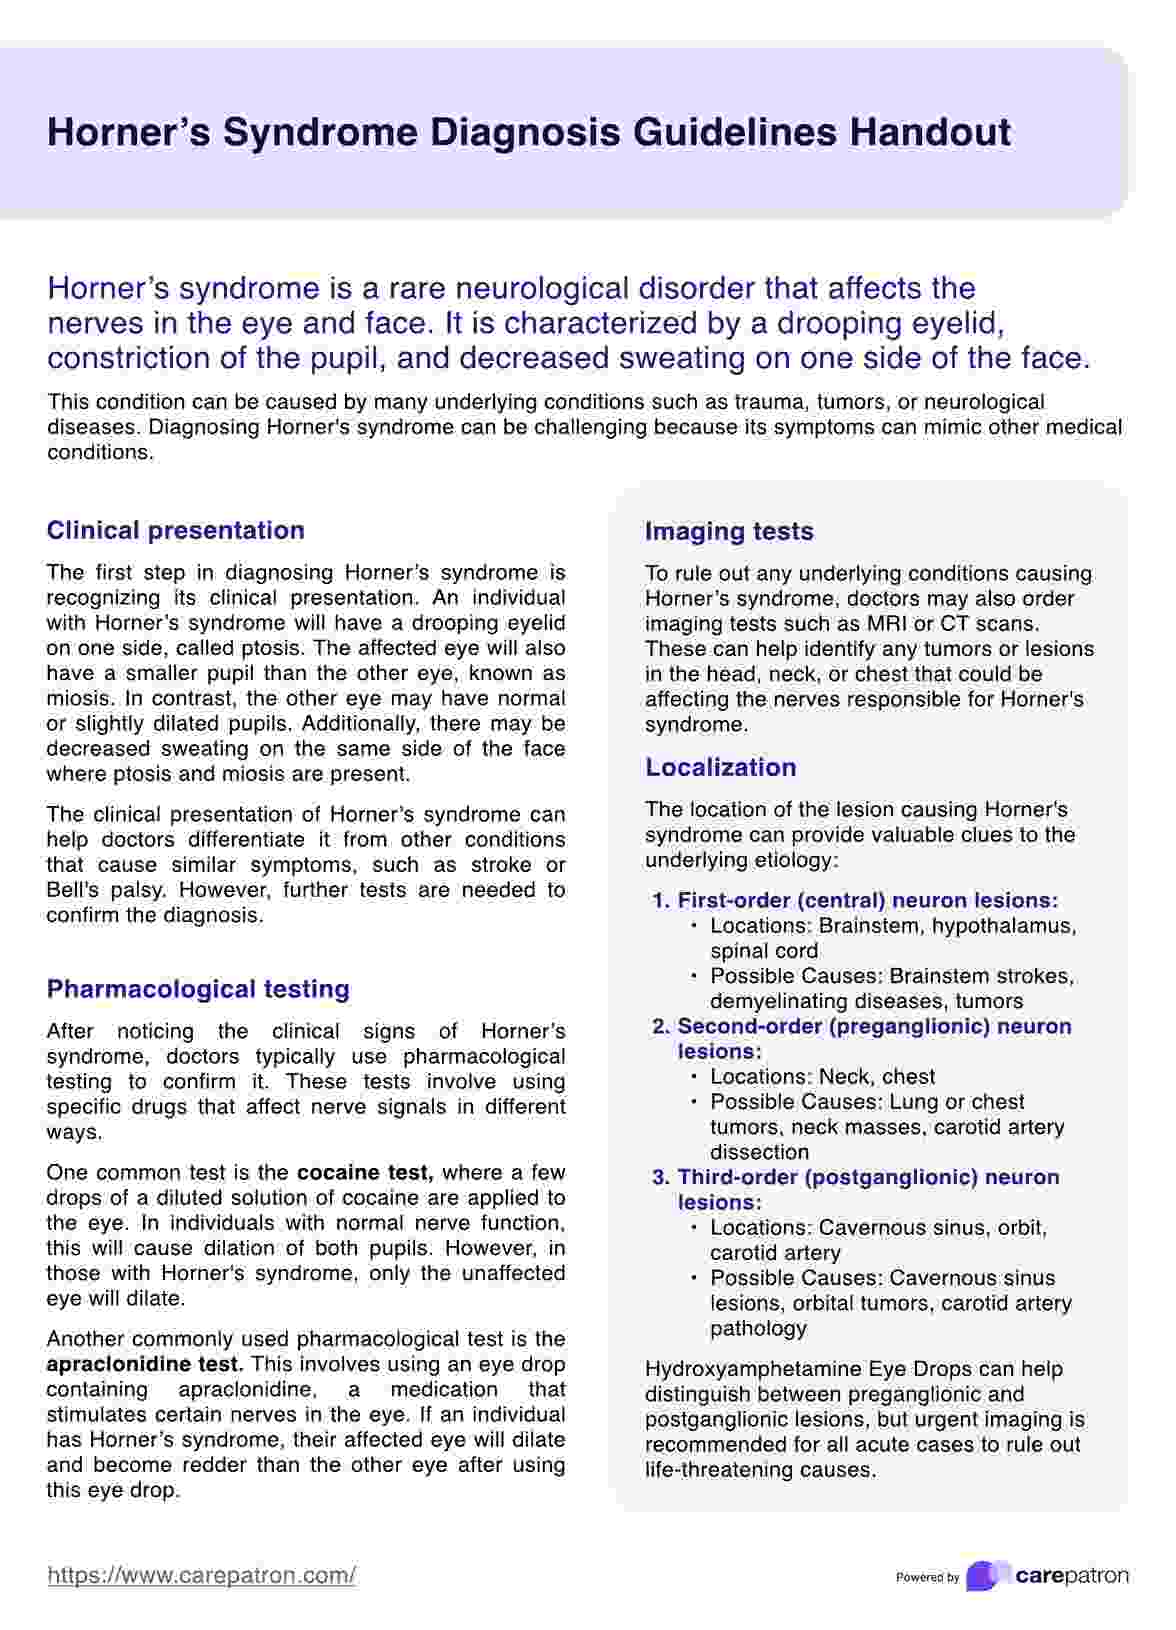 Horner's Syndrome Diagnosis Guidelines Handout PDF Example